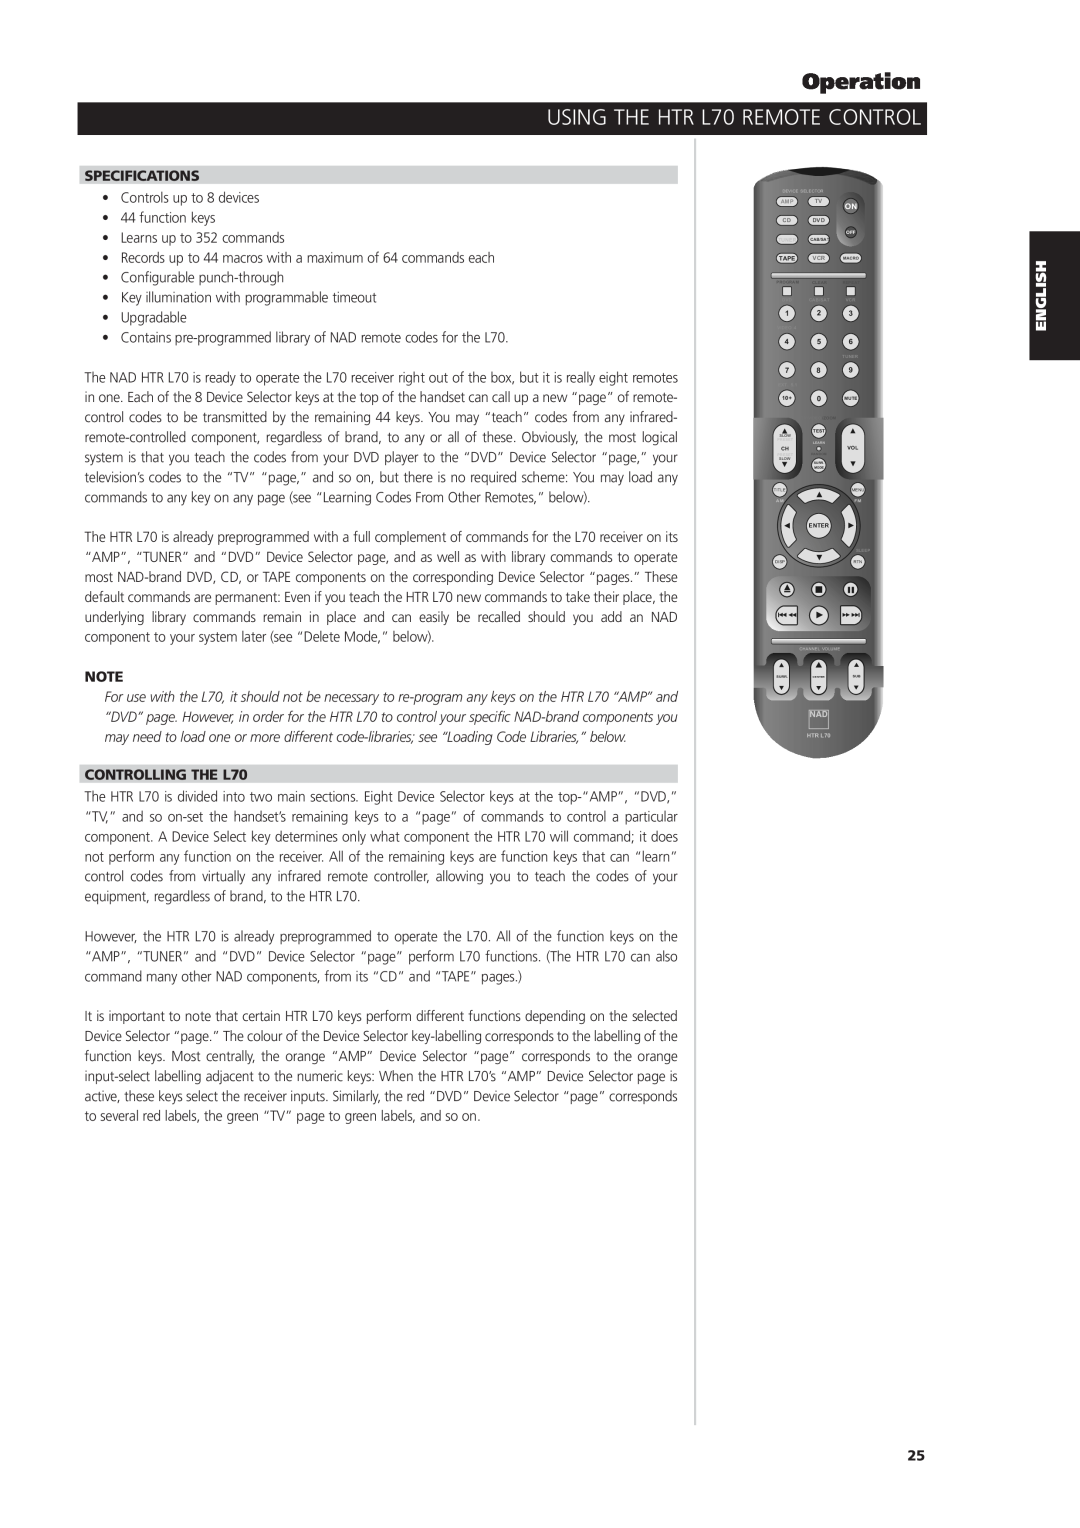 NAD owner manual USING THE HTR L70 REMOTE CONTROL, Specifications, CONTROLLING THE L70, Operation 